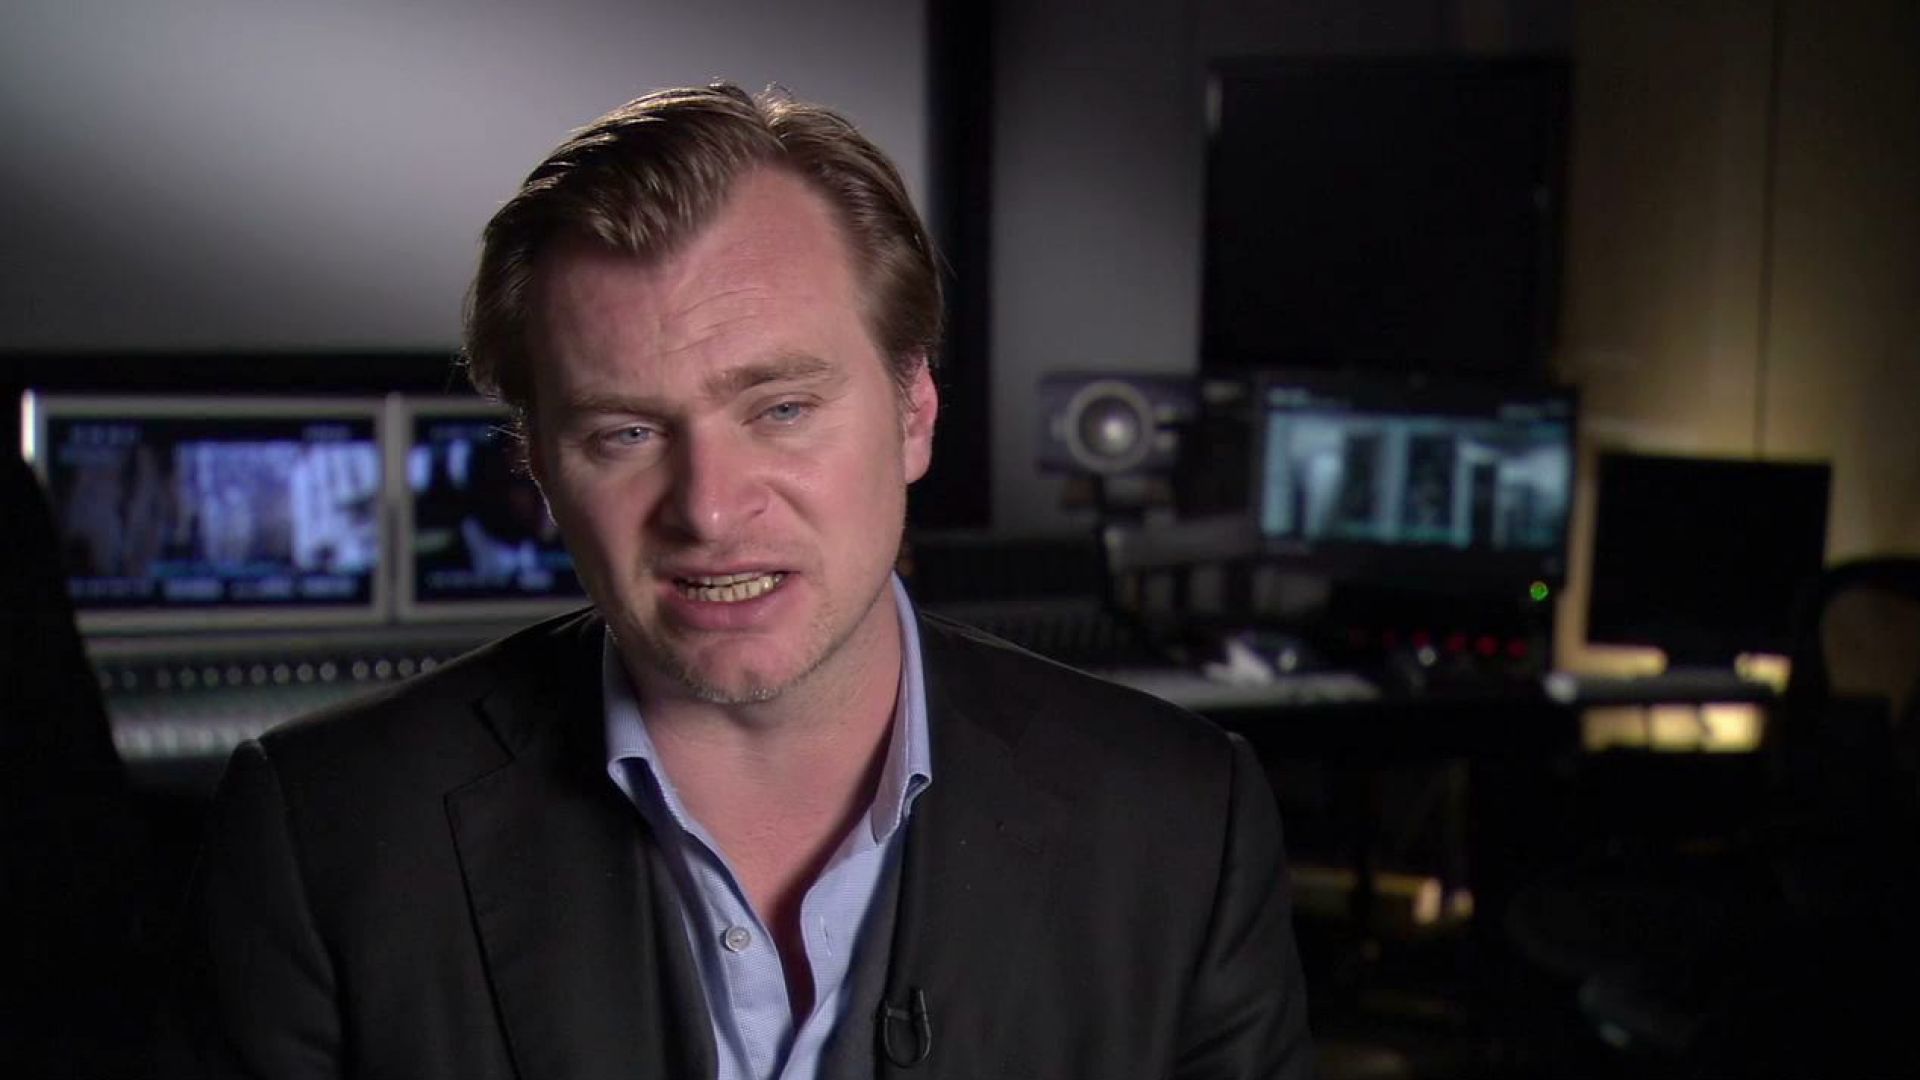 Christopher Nolan and Leonardo DiCaprio talk about making Inception